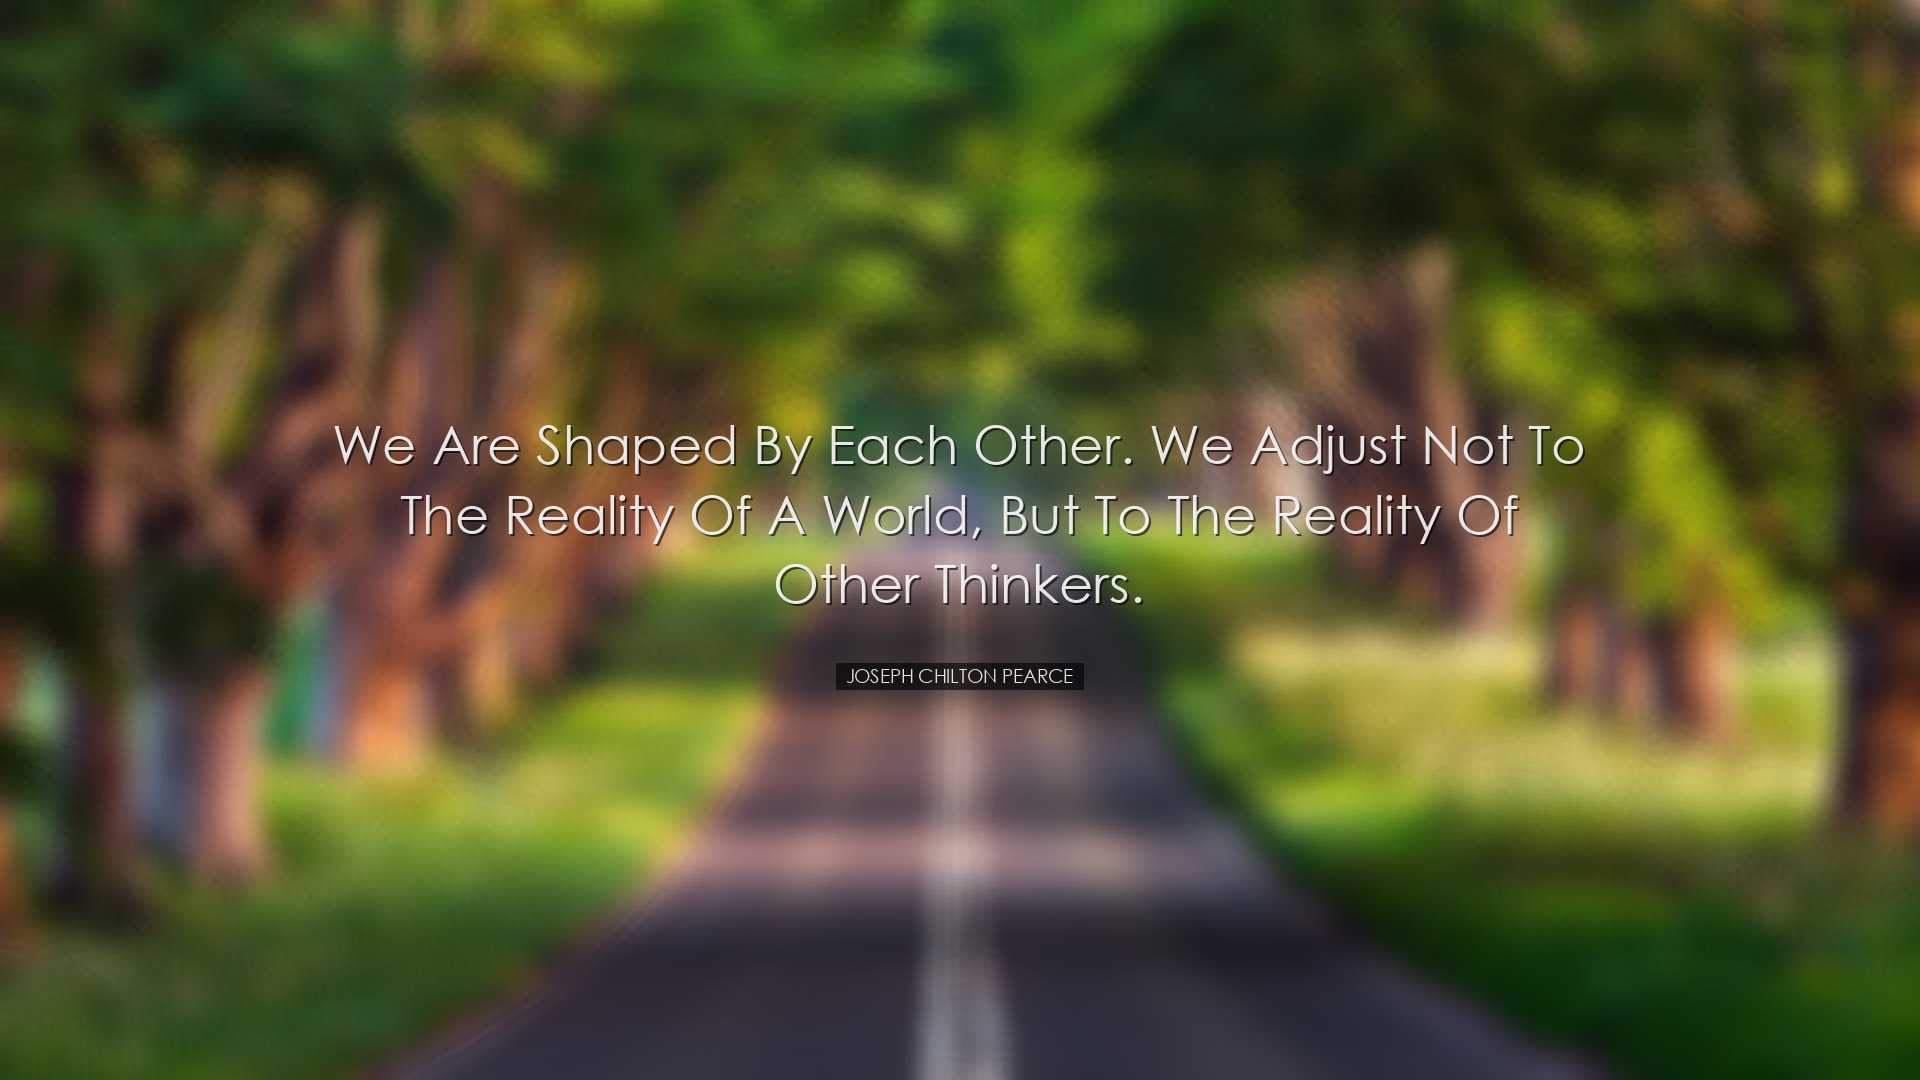 We are shaped by each other. We adjust not to the reality of a wor